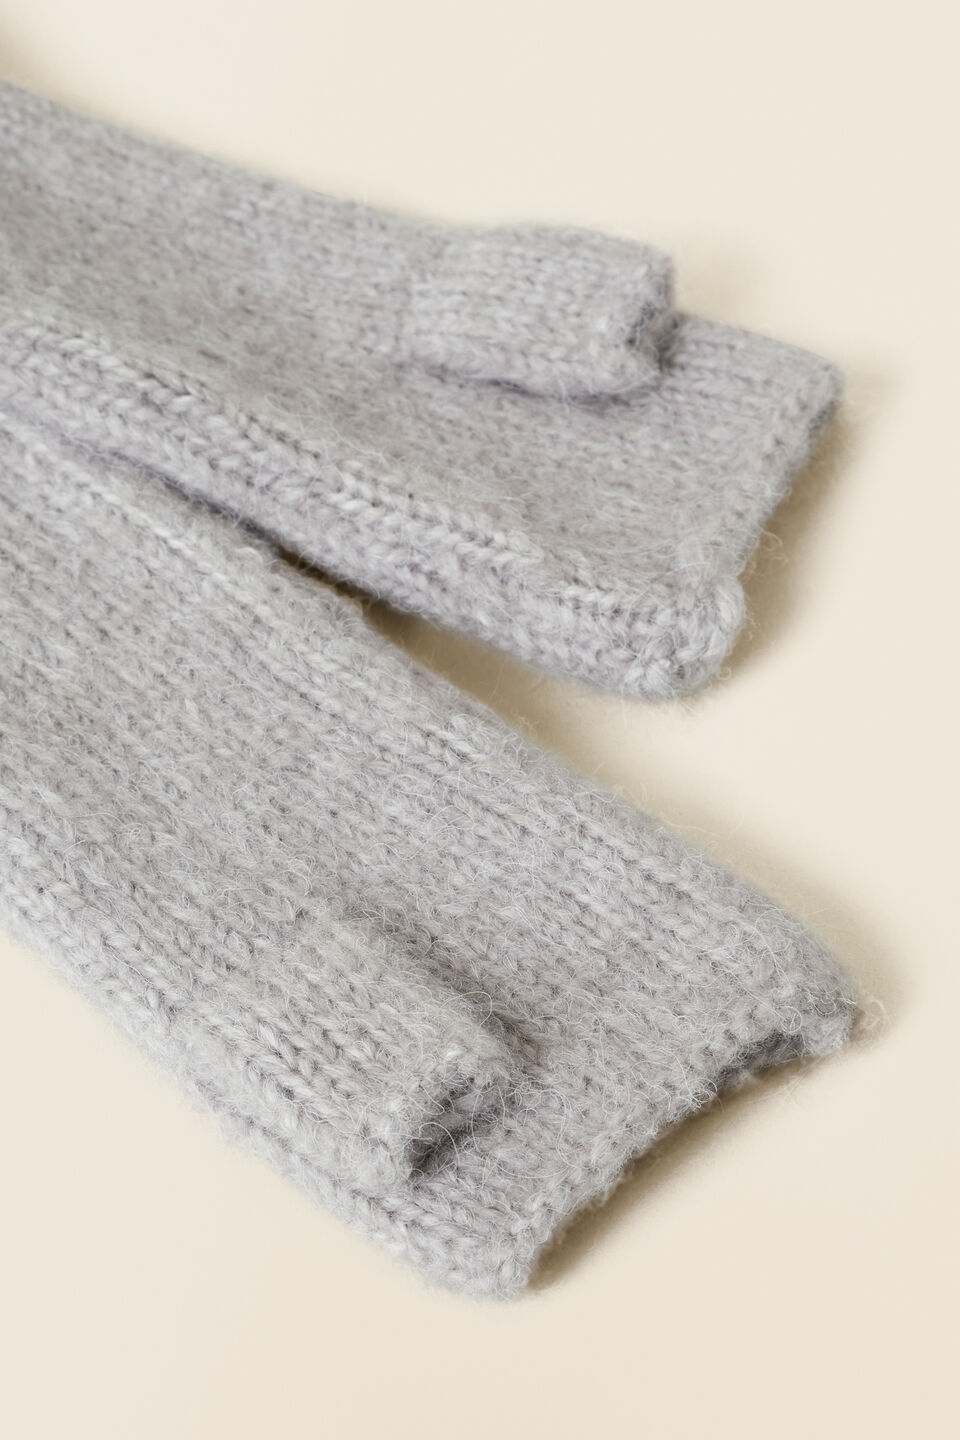 Chunky Knit Arm Warmers  Silver Marle